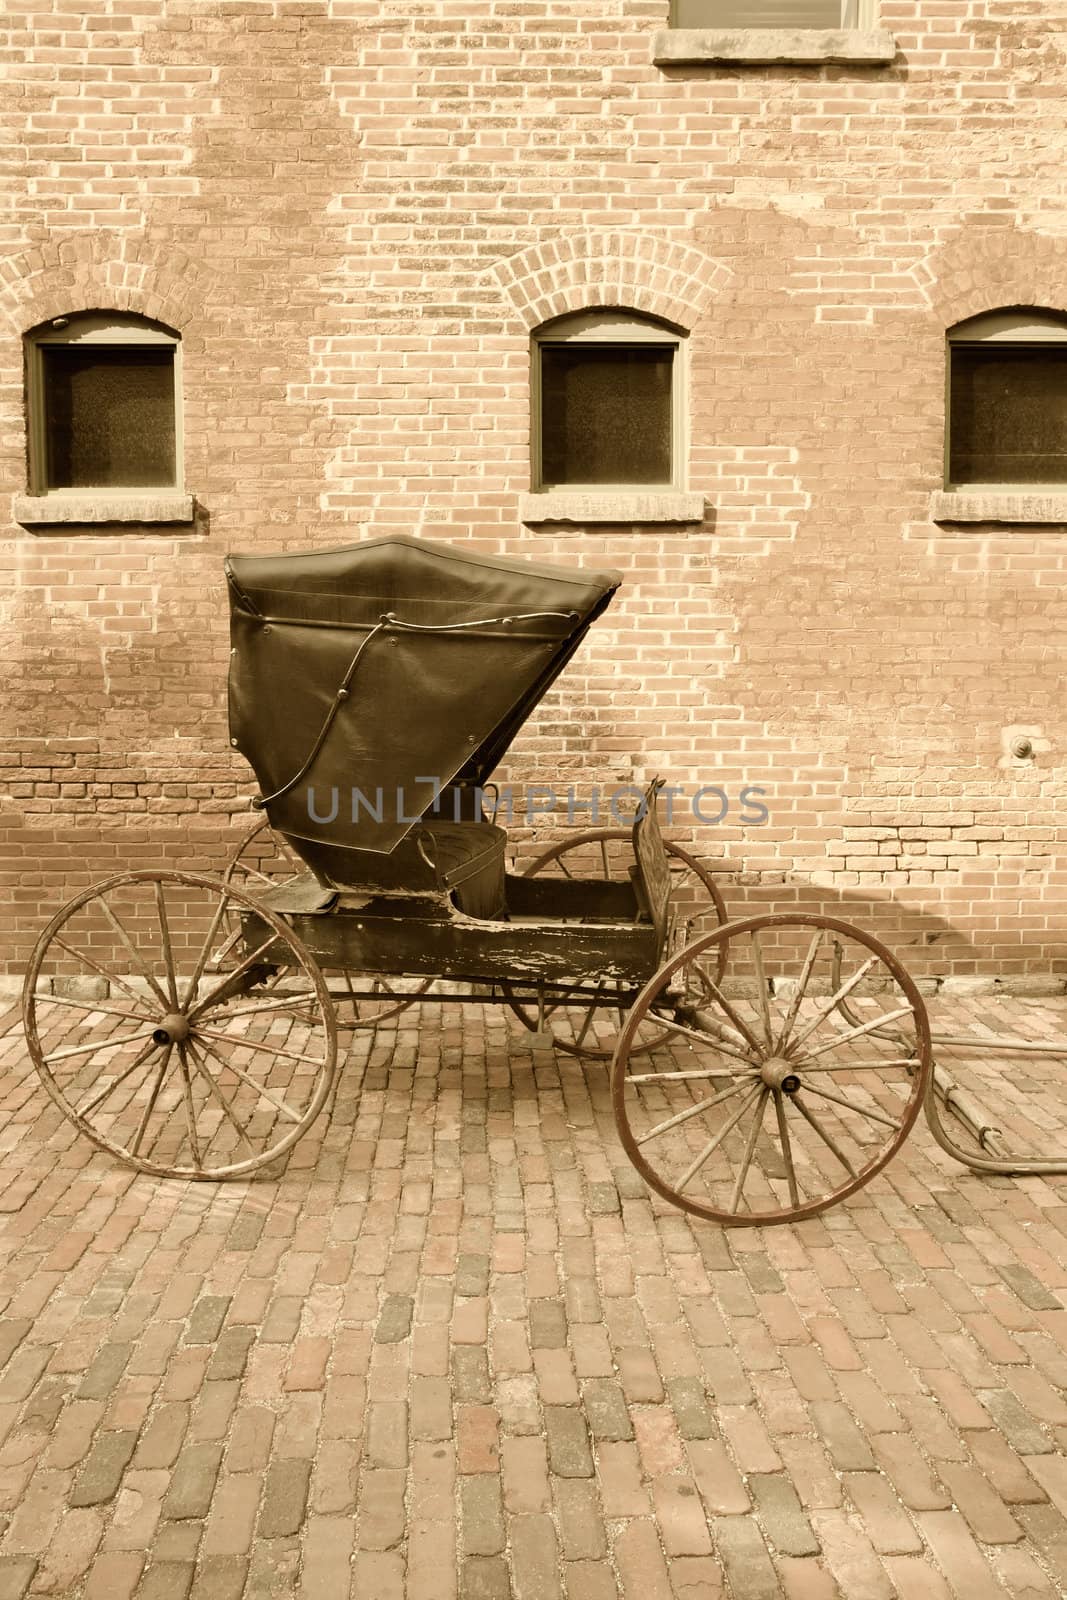 An old horse-drawn carriage done in sepia.
